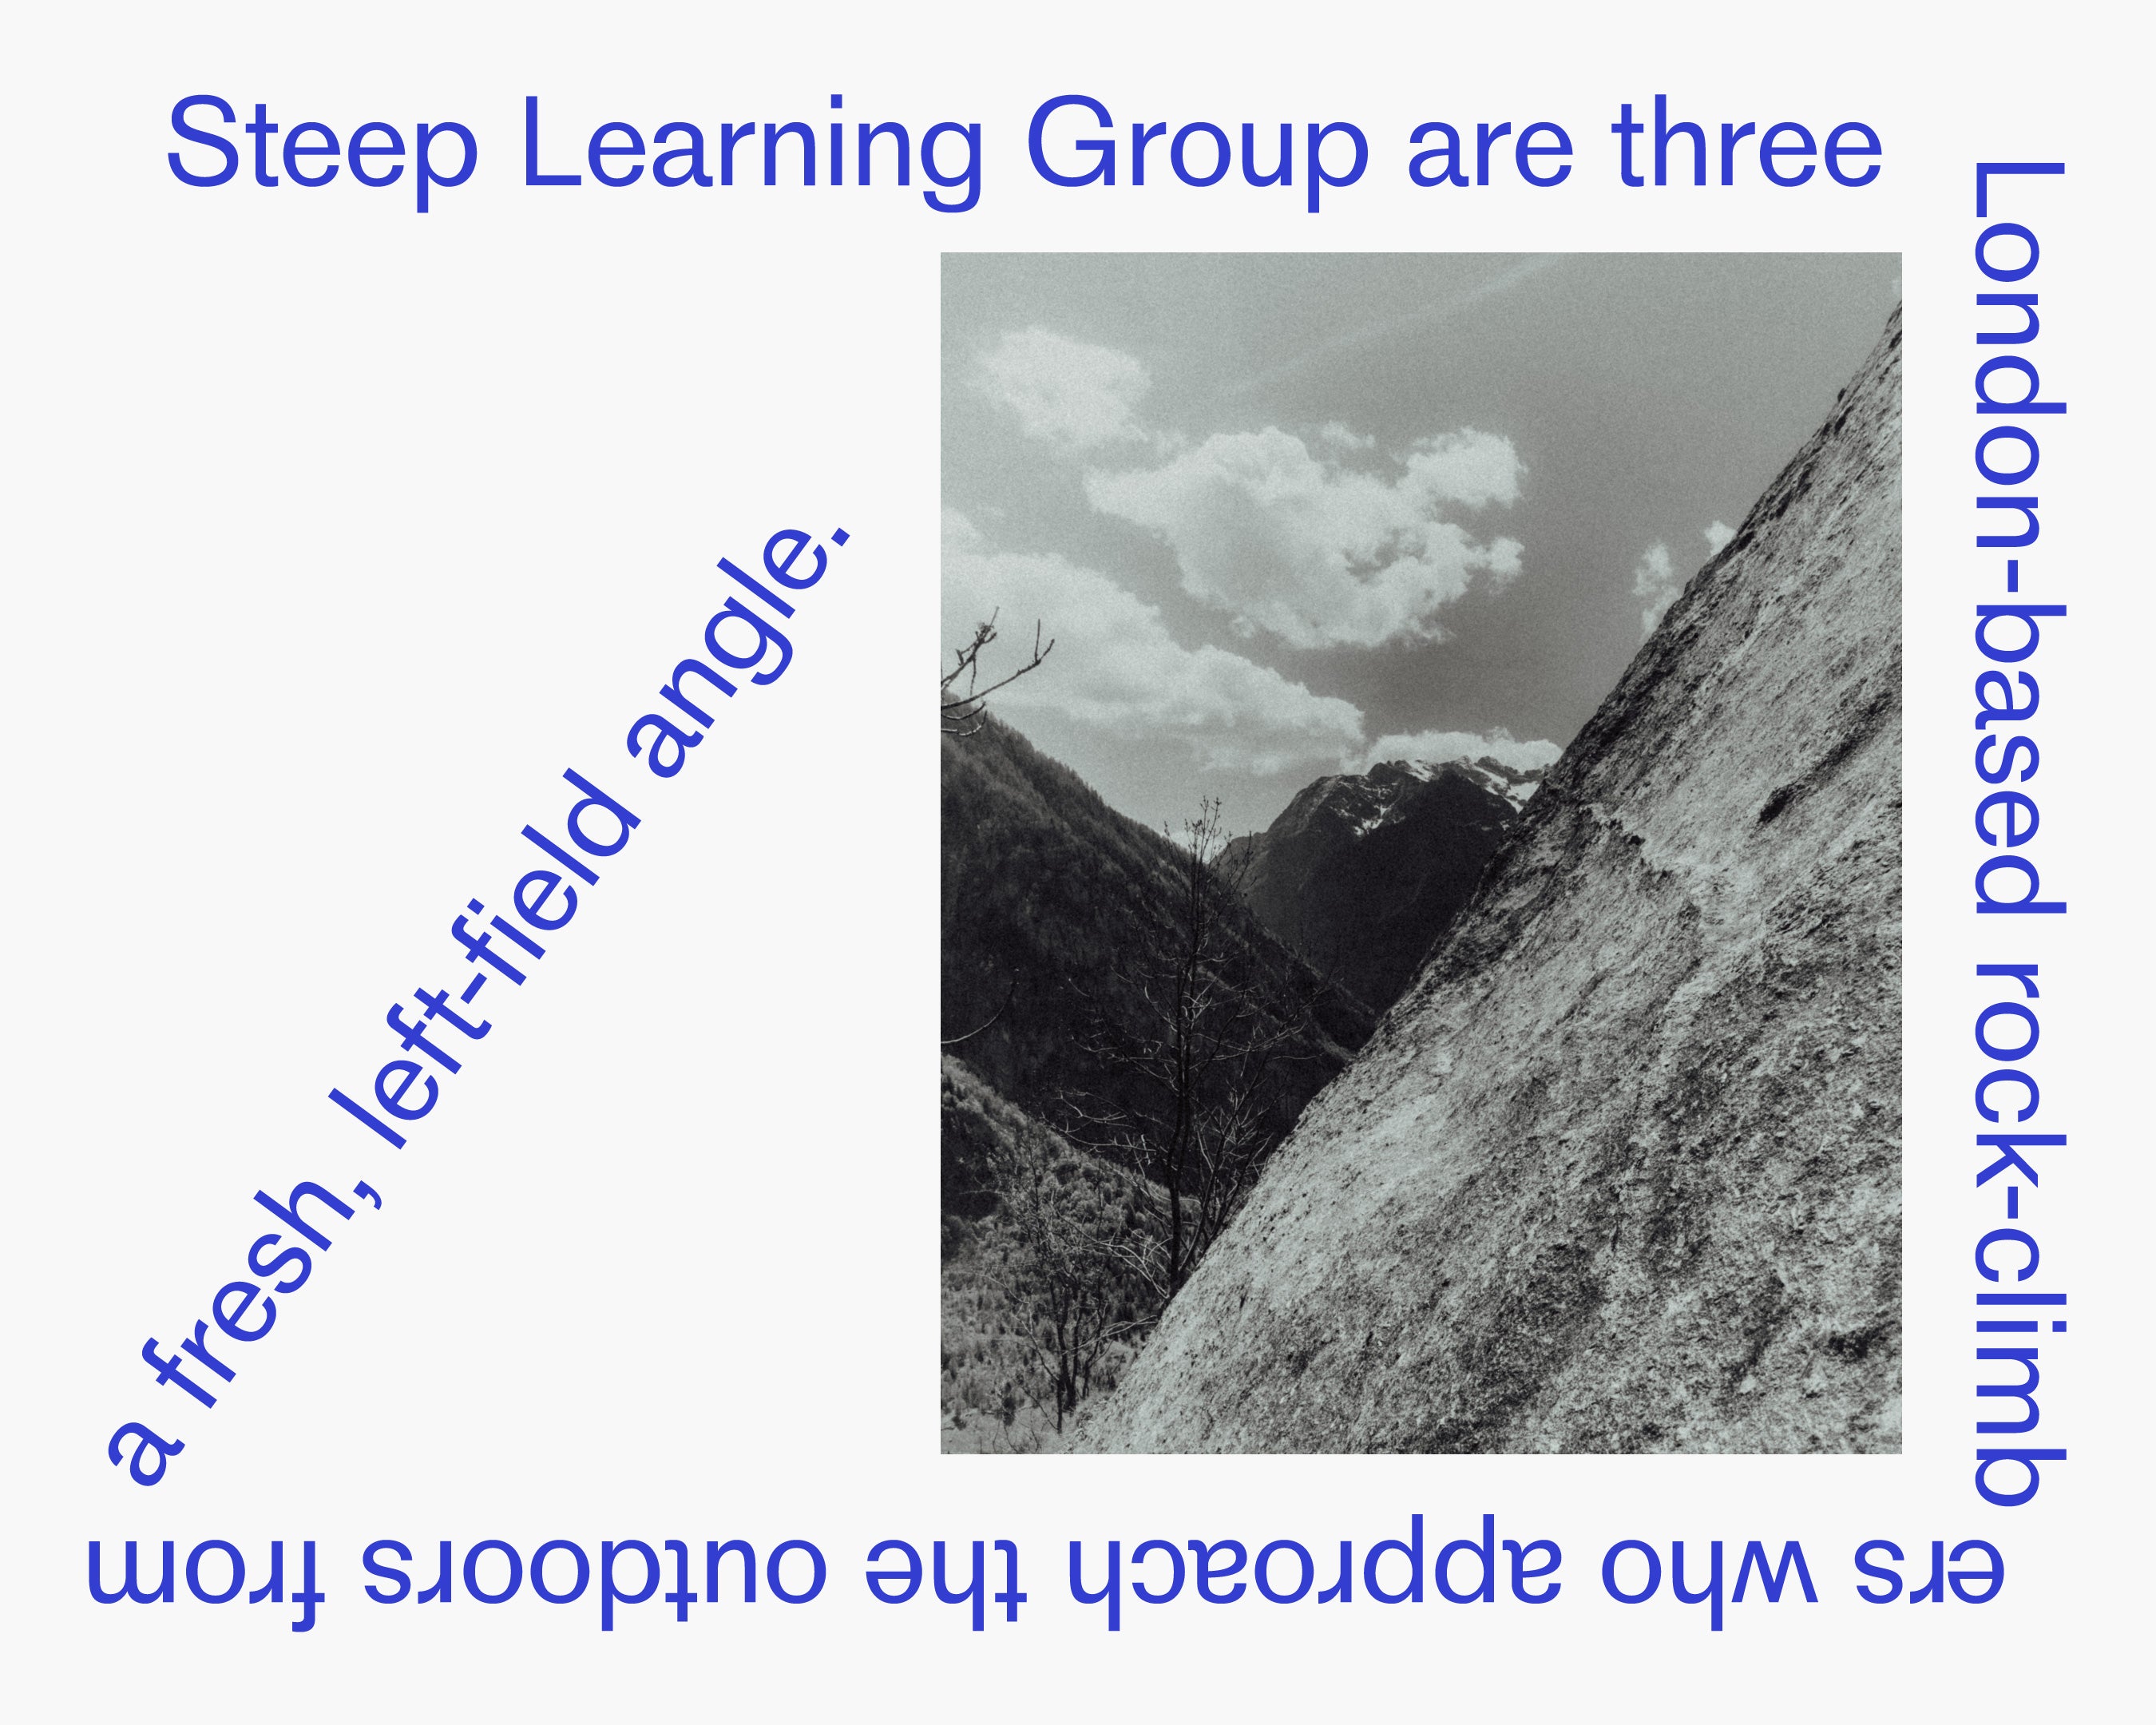 An Interview with Steep Learning Group